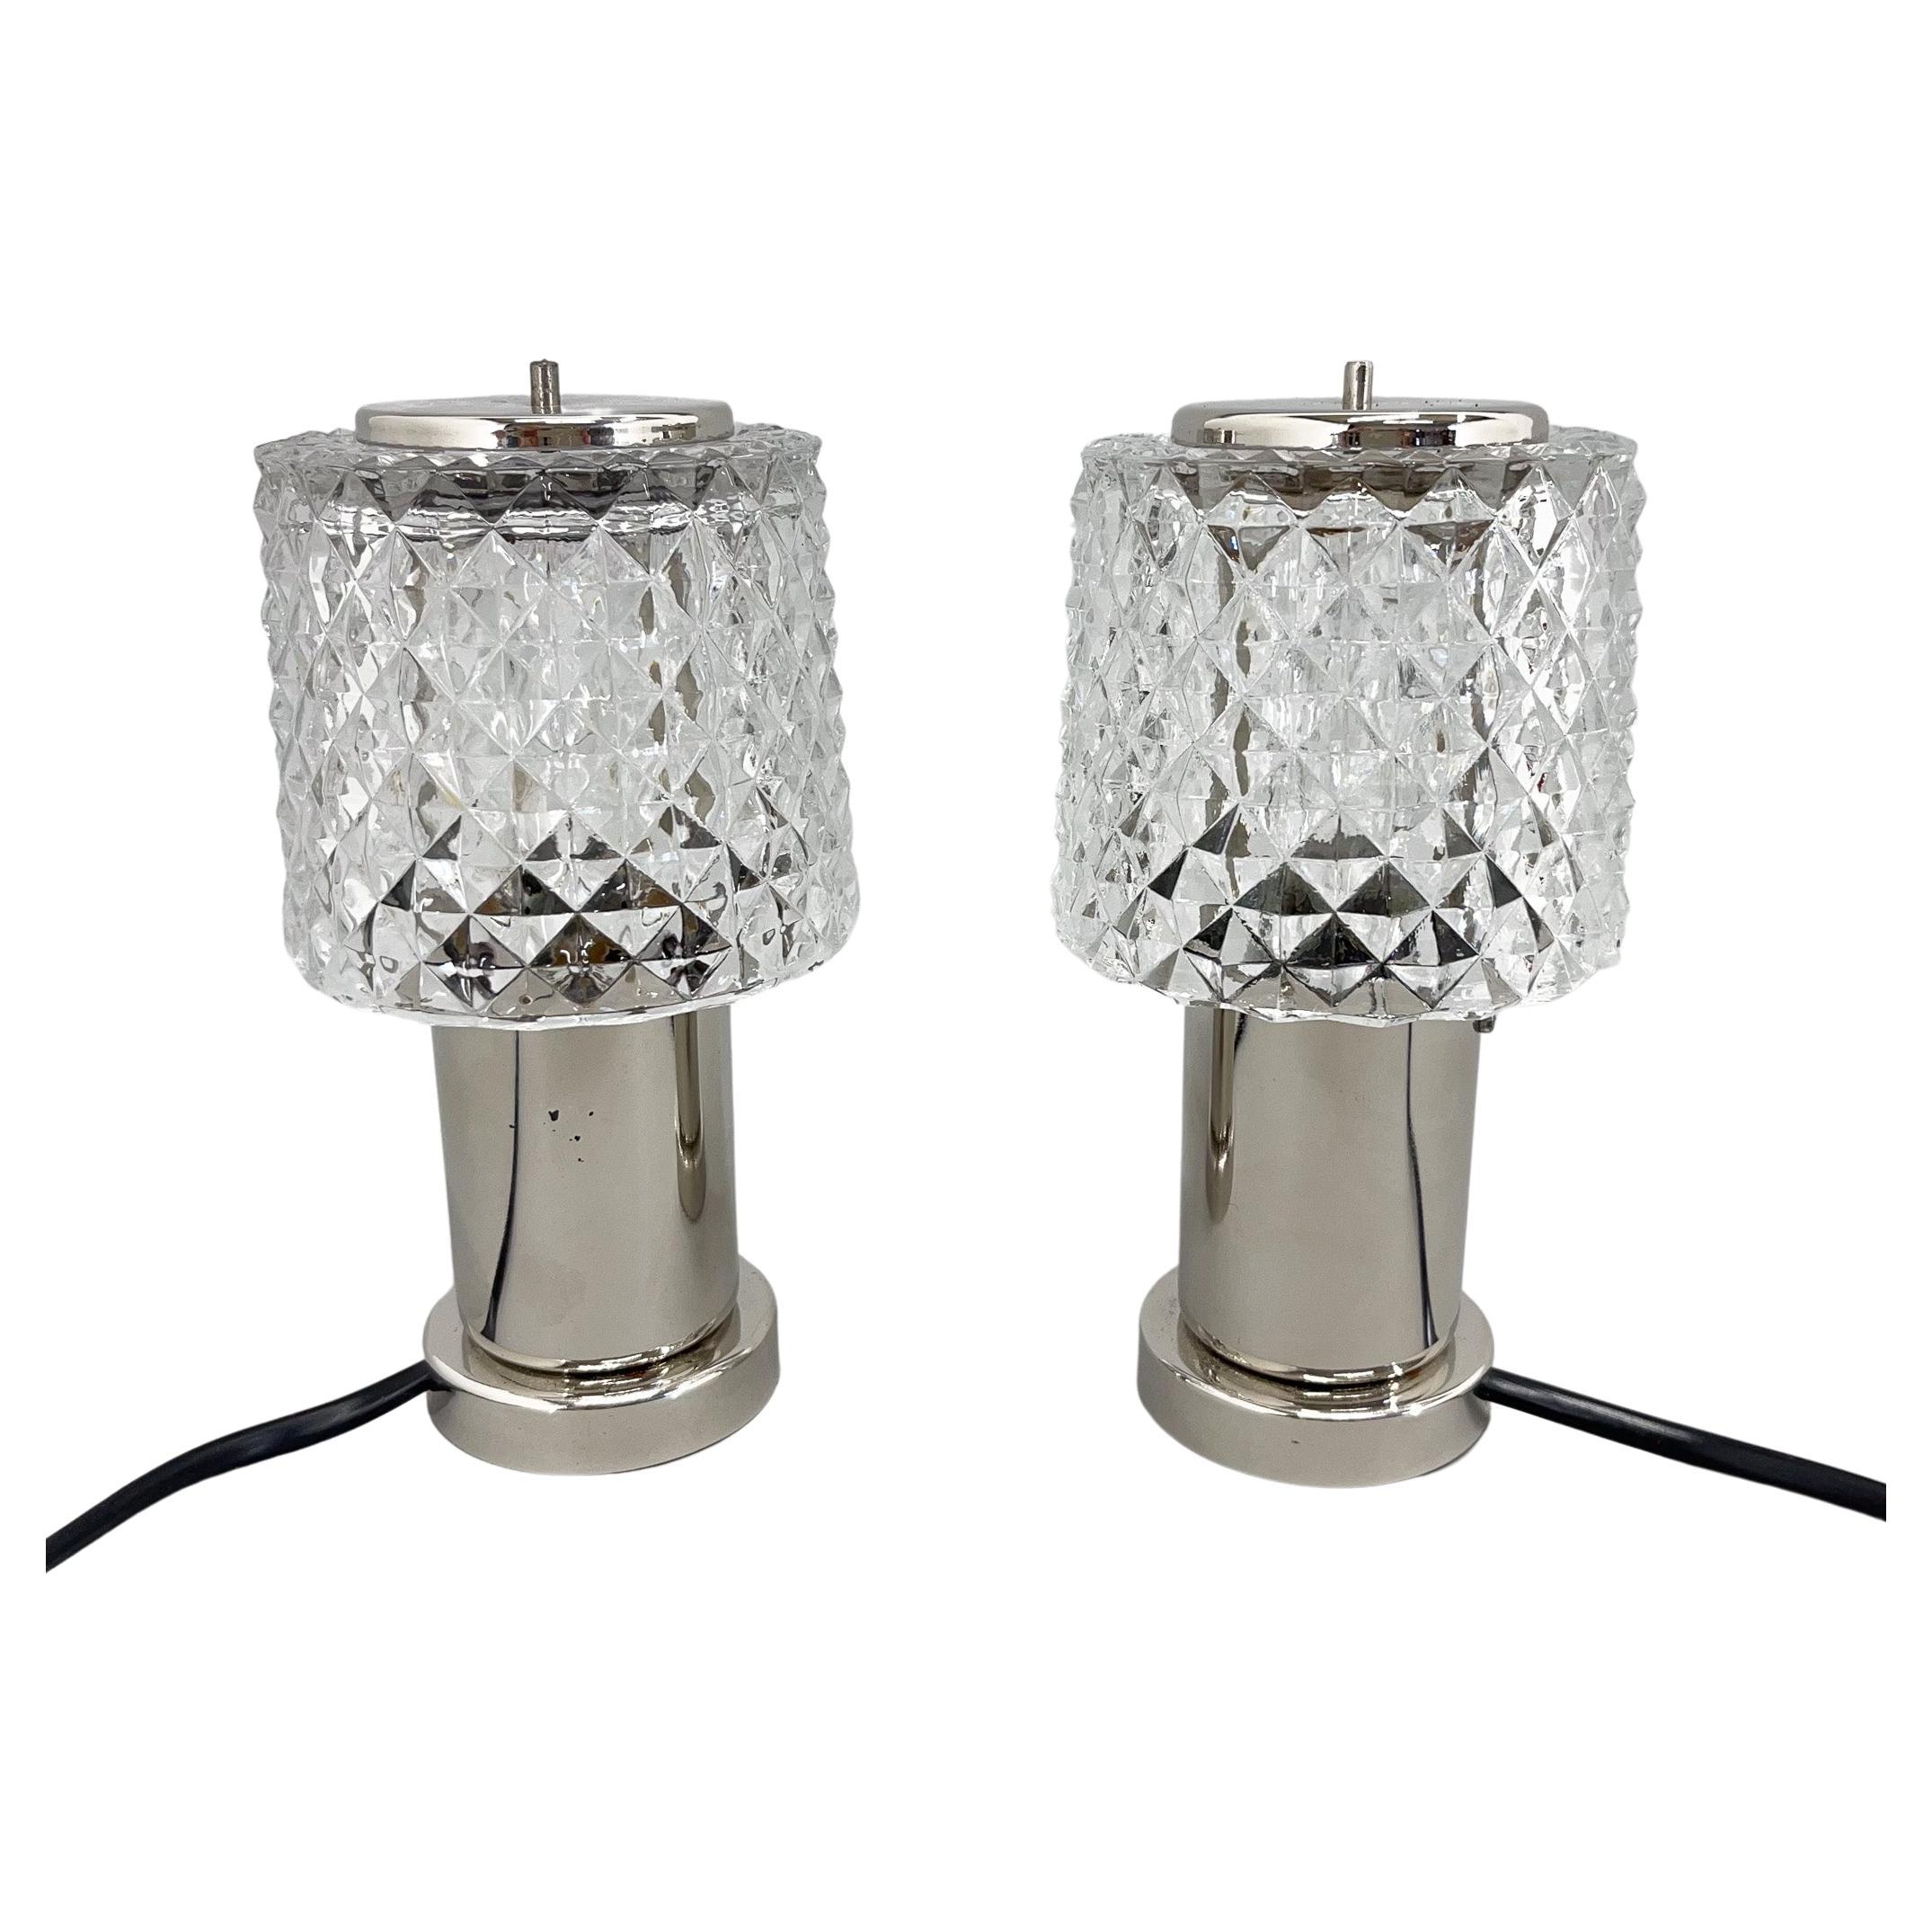 Pair of Mid-Century Chrome Table Lamps, 1960's / 4 Pairs Available